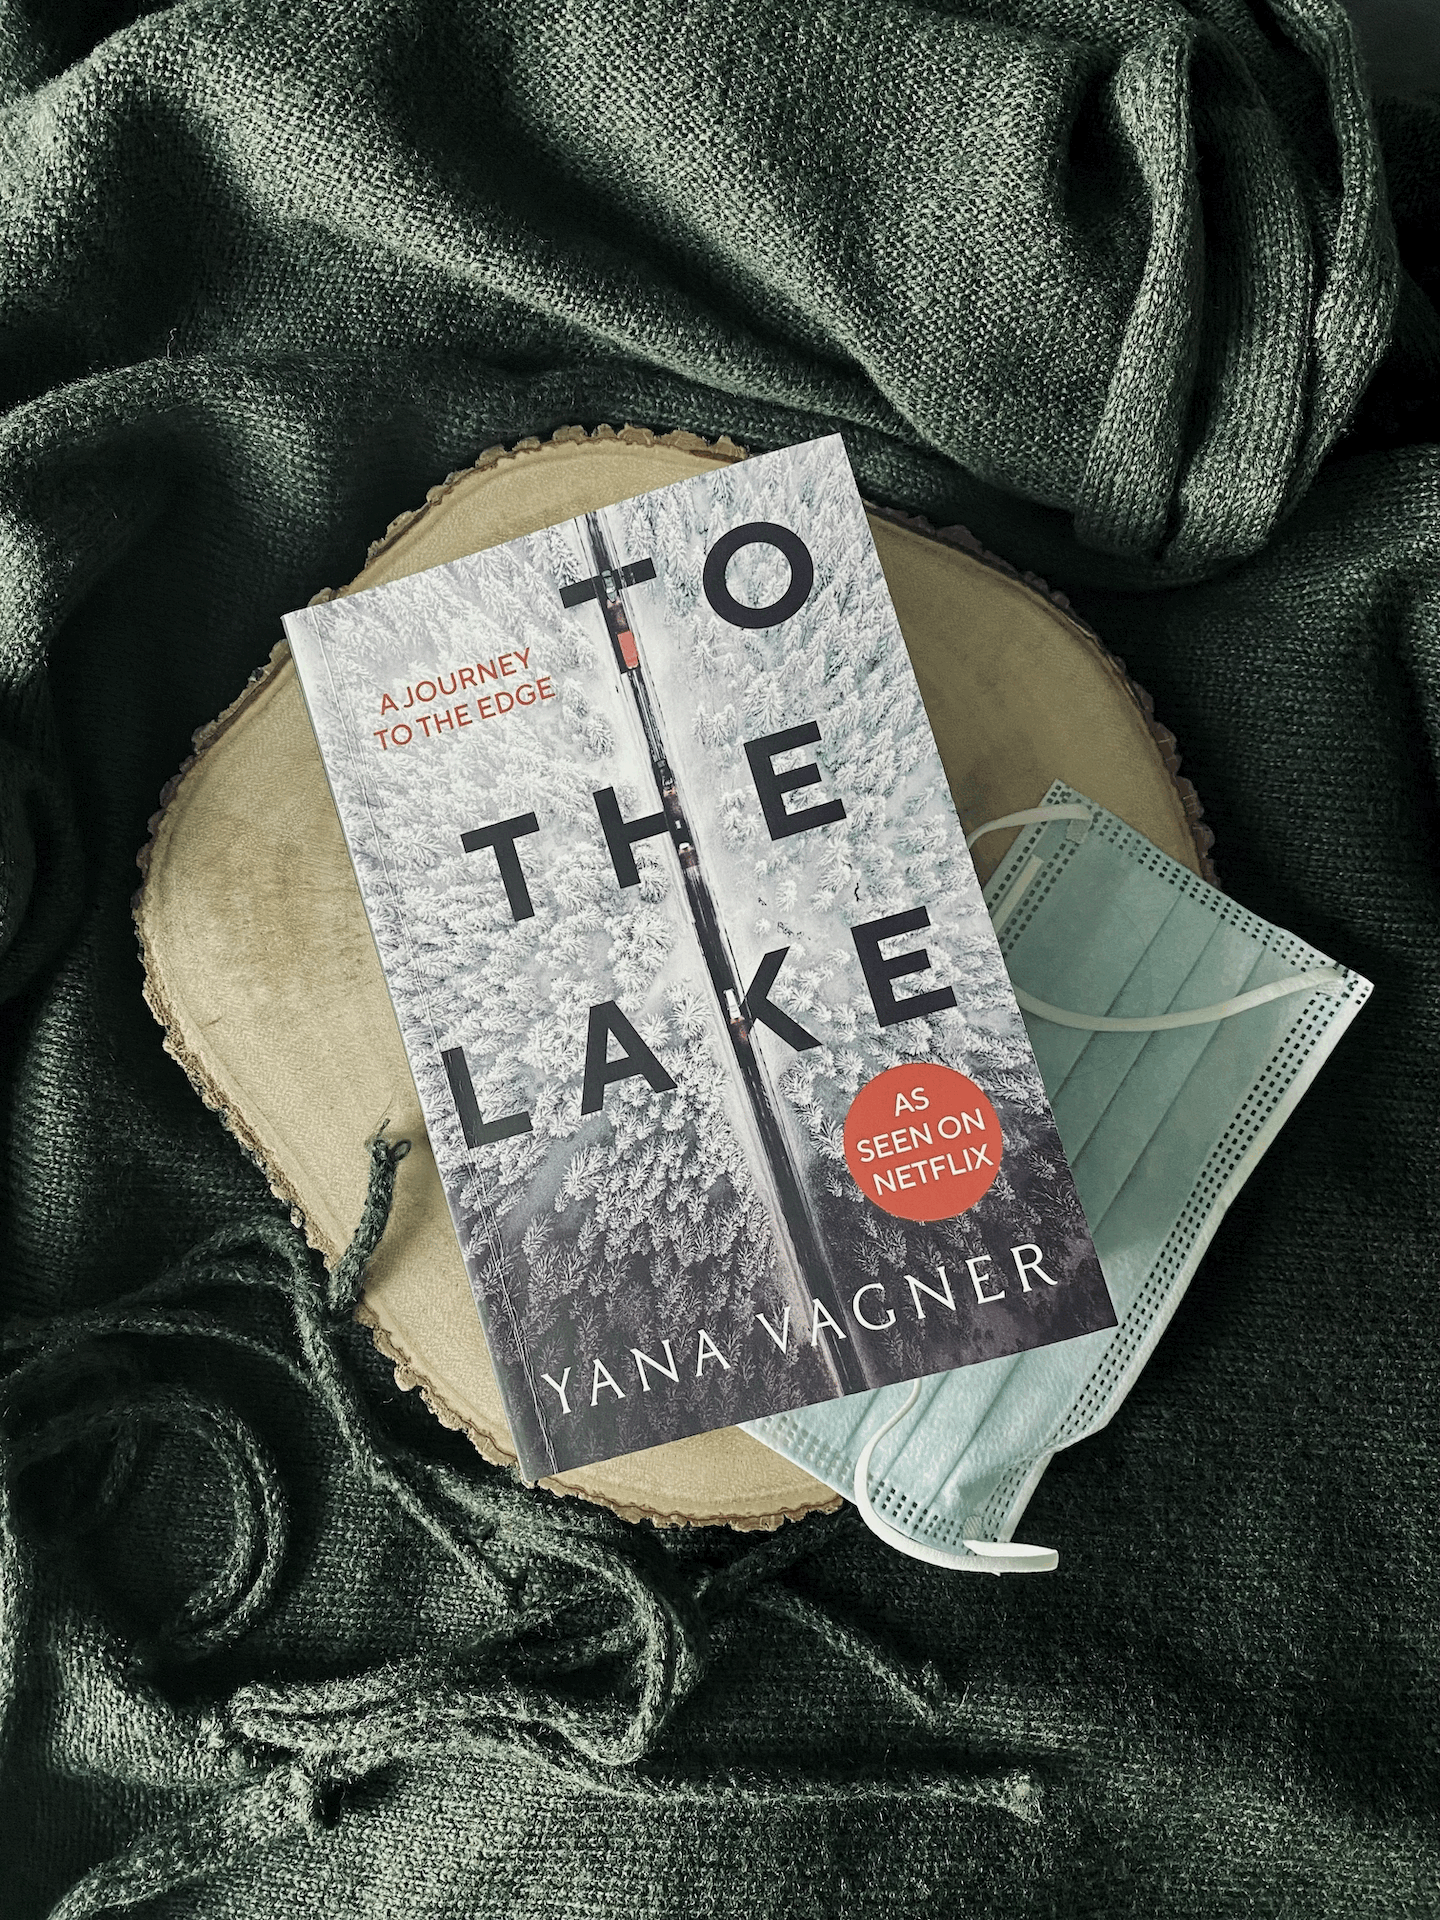 Book review: To The Lake - Yana Vagner